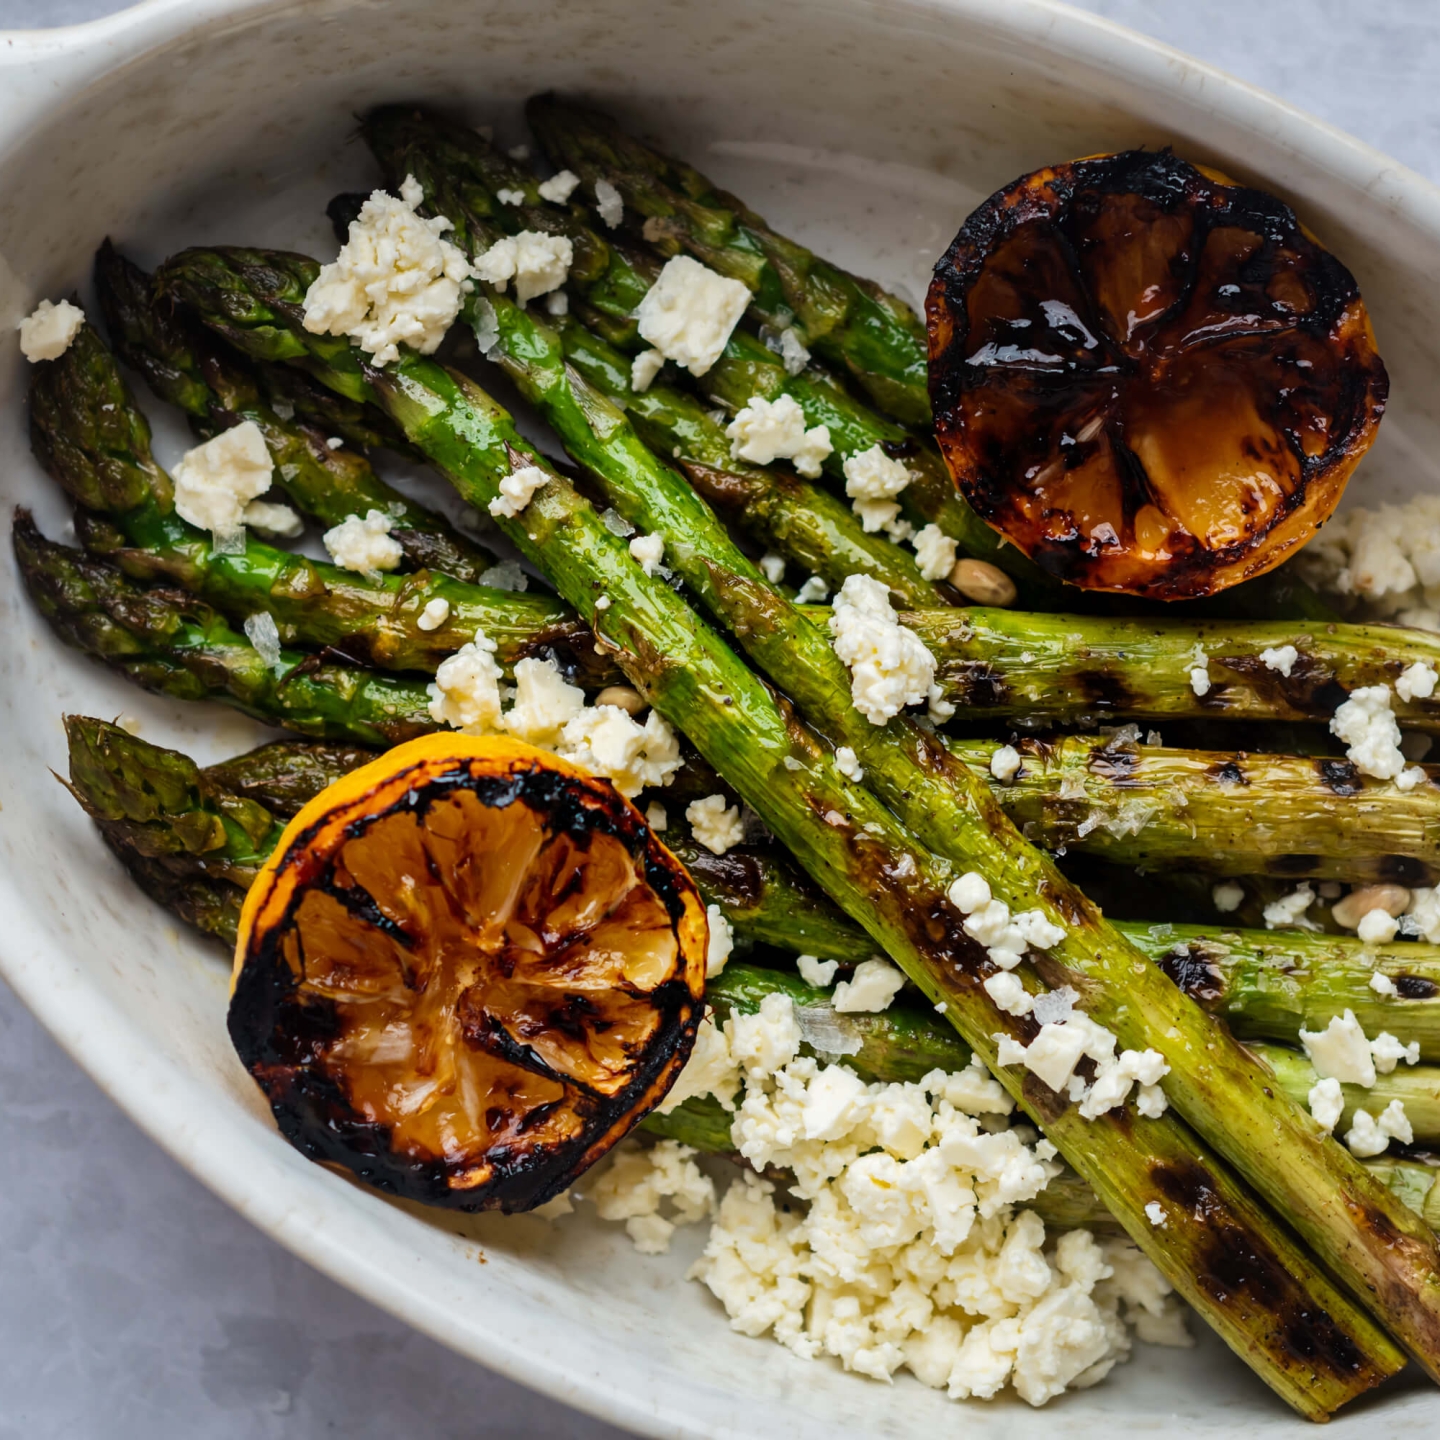 Grilled lemon asparagus topped with crumbled feta cheese and served with grilled lemon halves.